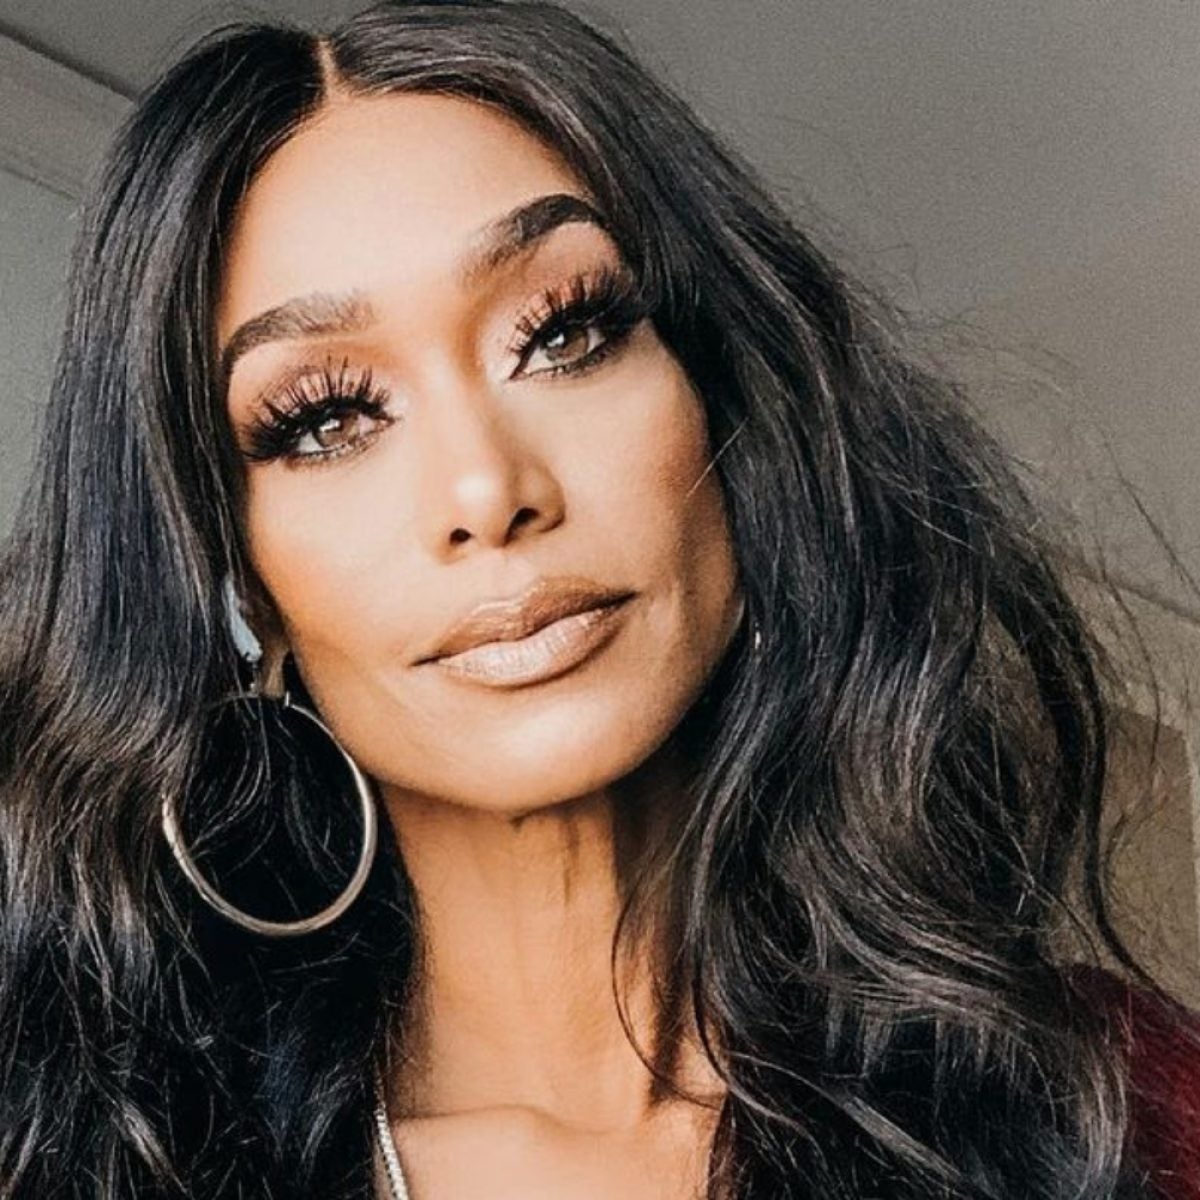 Tami Roman Opens Up About Decades-Long Struggle With Body Dysmorphic Disorder